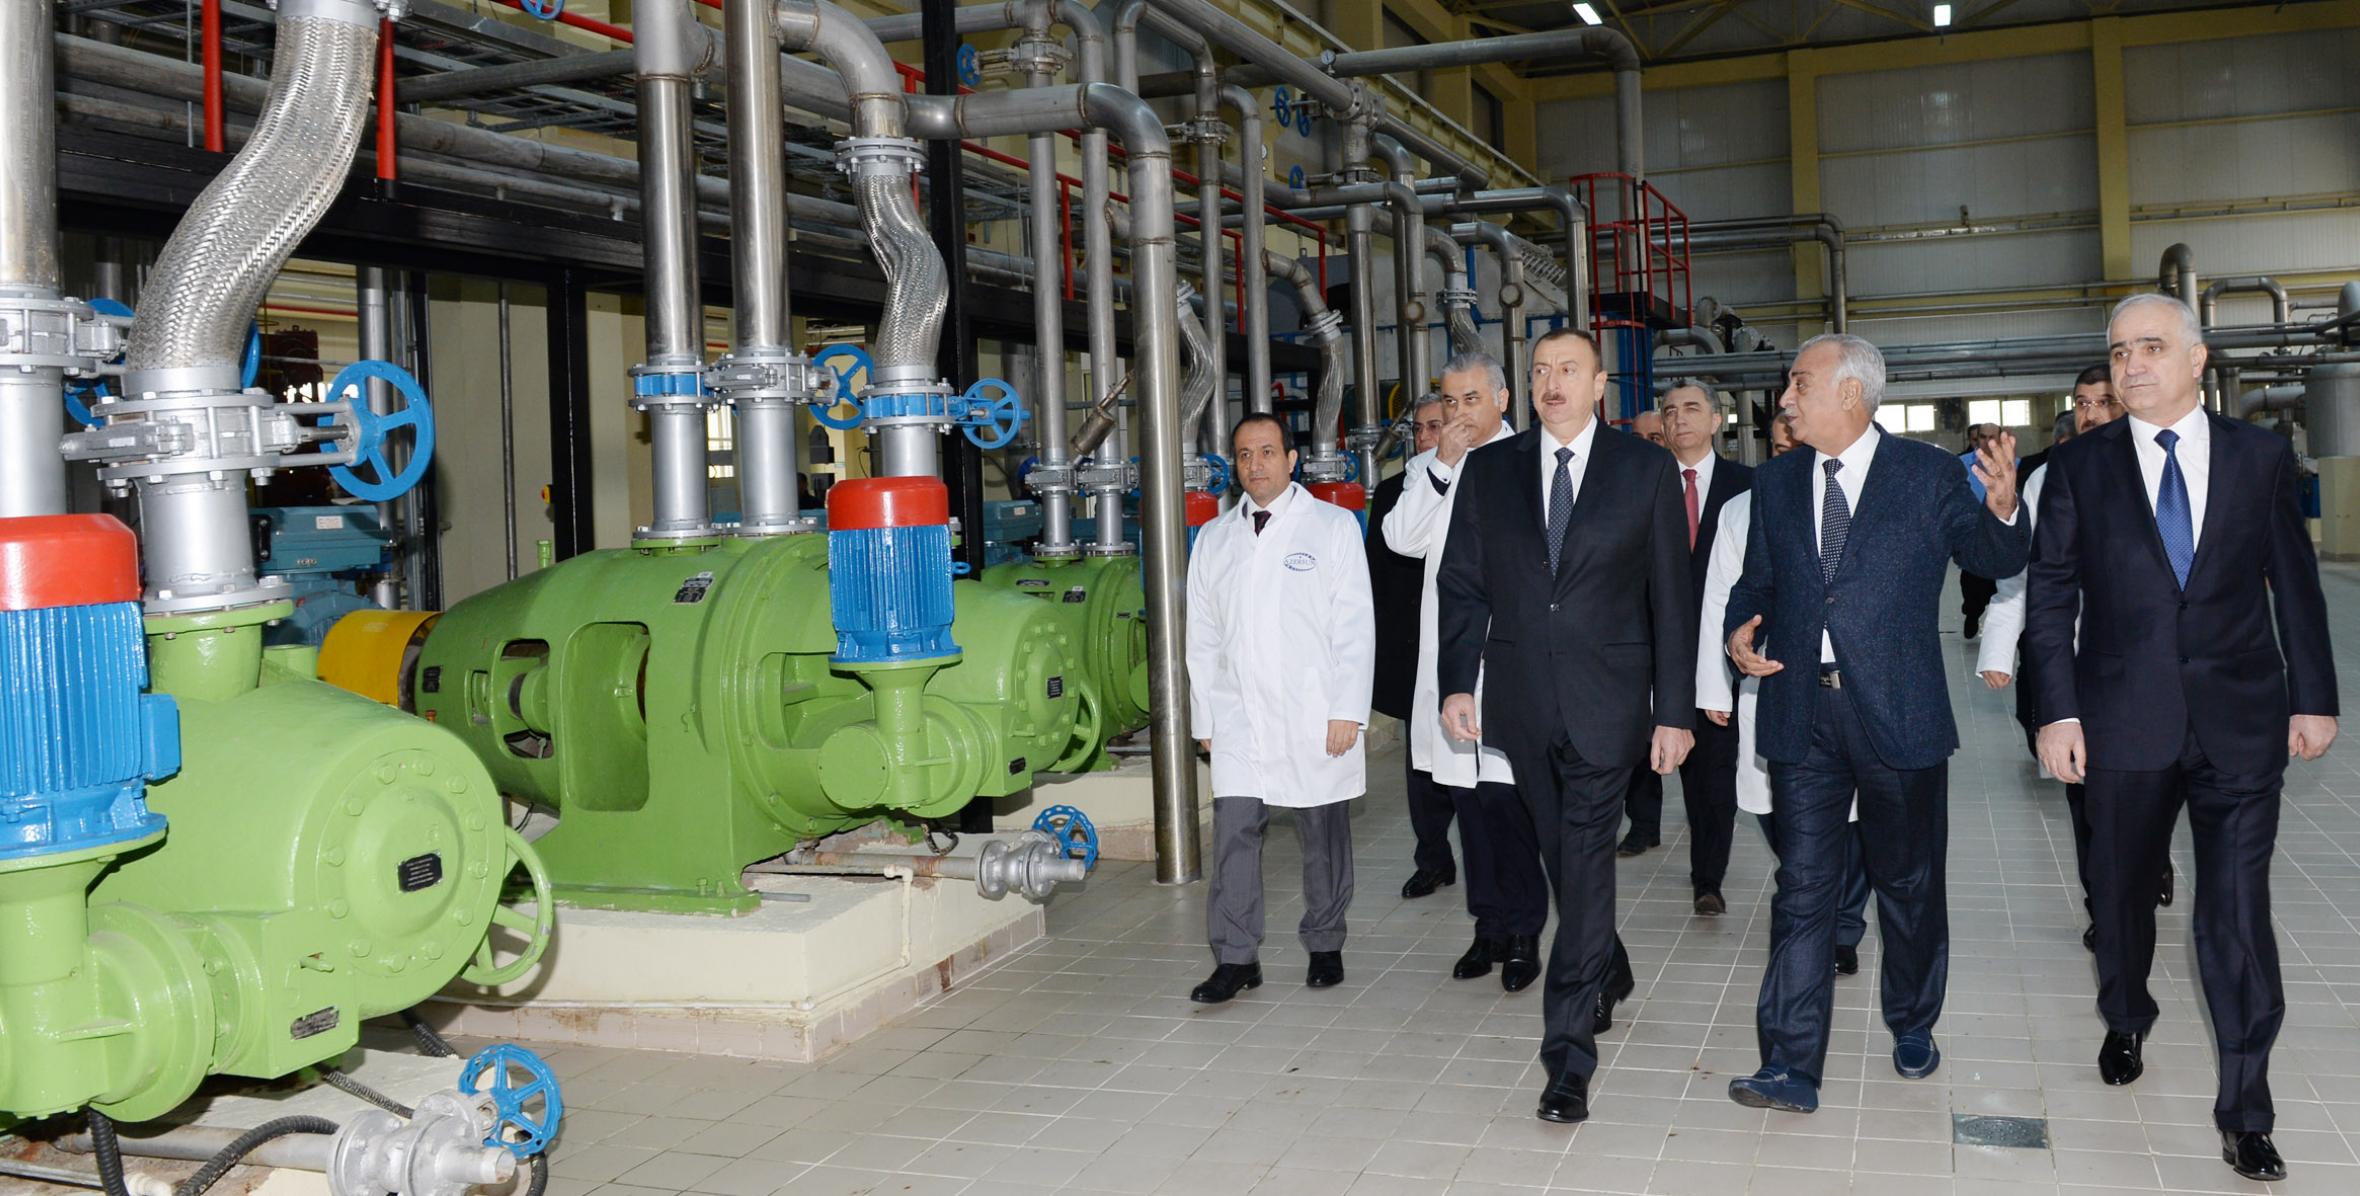 Ilham Aliyev attended the opening of the Azerbaijan factory for the production of paper and cardboard created within the "Azersun Industrial Estate" in Sumgayit